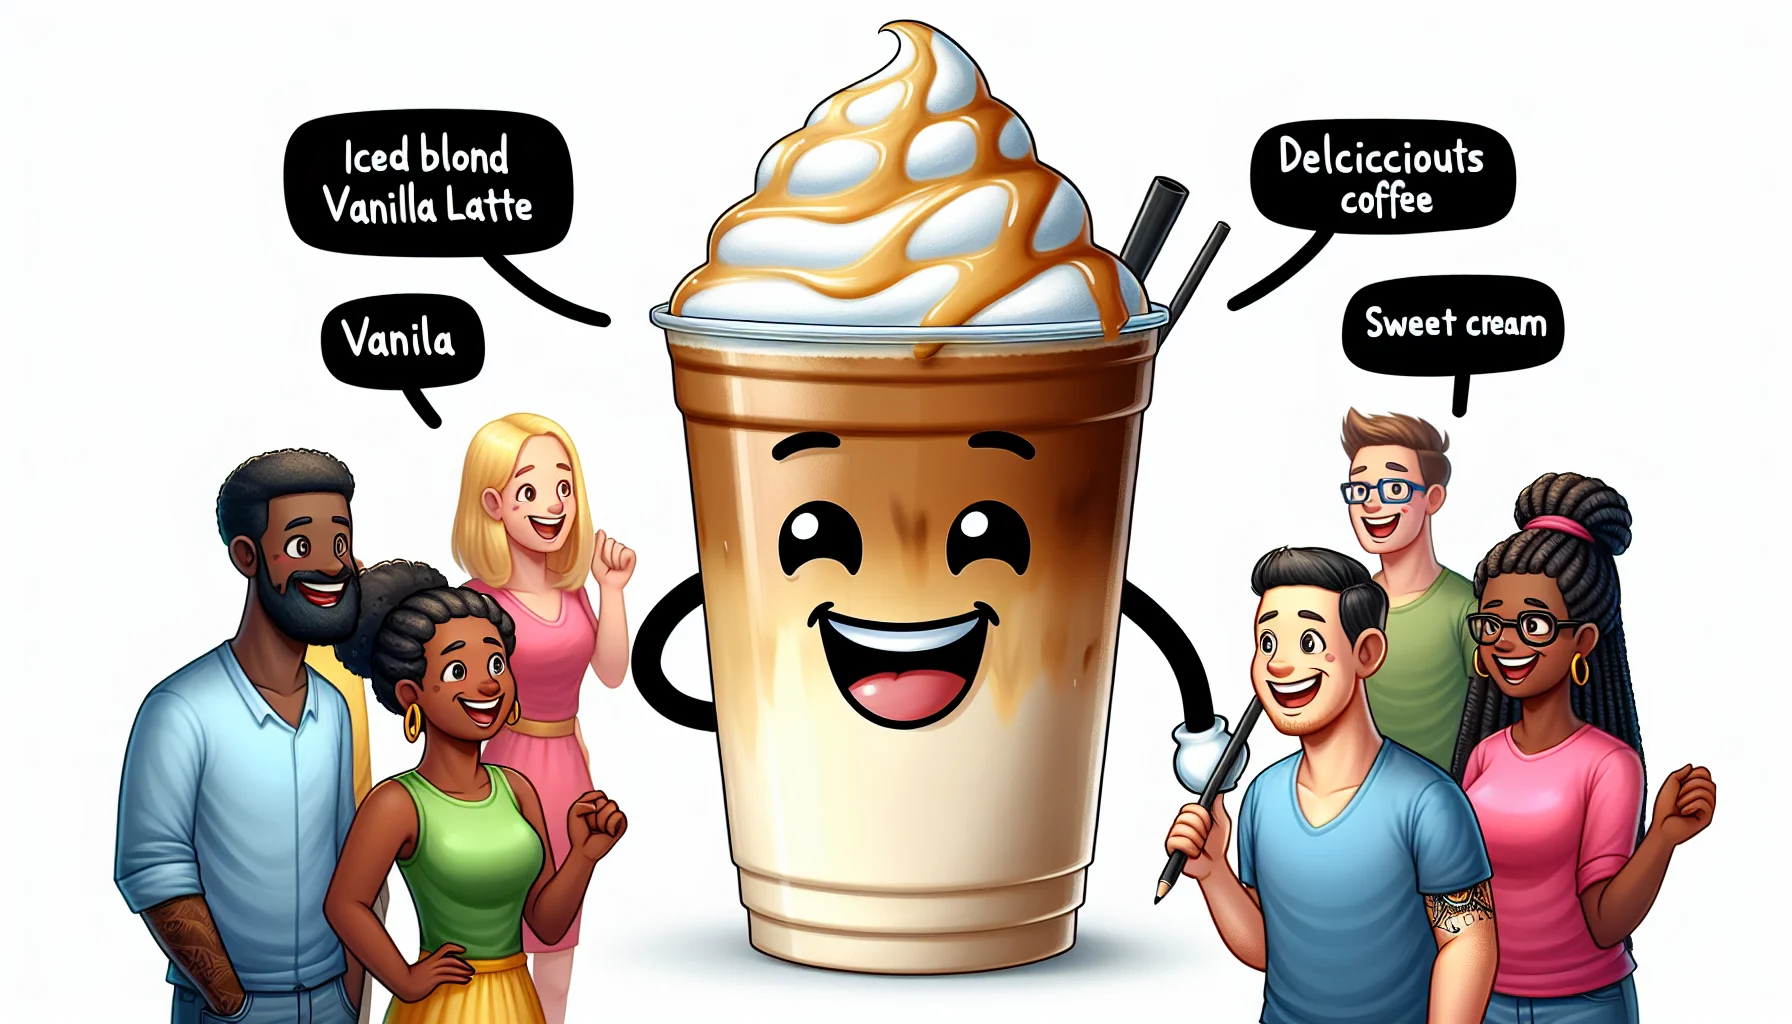 Paint an amusing scene where an iced blonde vanilla latte—tall and frosty, with a blend of light, delicious coffee, vanilla, and sweet cream—interacts humorously with humans. The latte wears an endearing smile on the froth, inviting people around to taste its delightful flavors. Humans, of varying descents like Hispanic, Asian and Black, and genders, male and female, are completely enamored, their eyes wide with anticipation and their lips twitching into laughter at the sight of this lovable anthropomorphized latte.